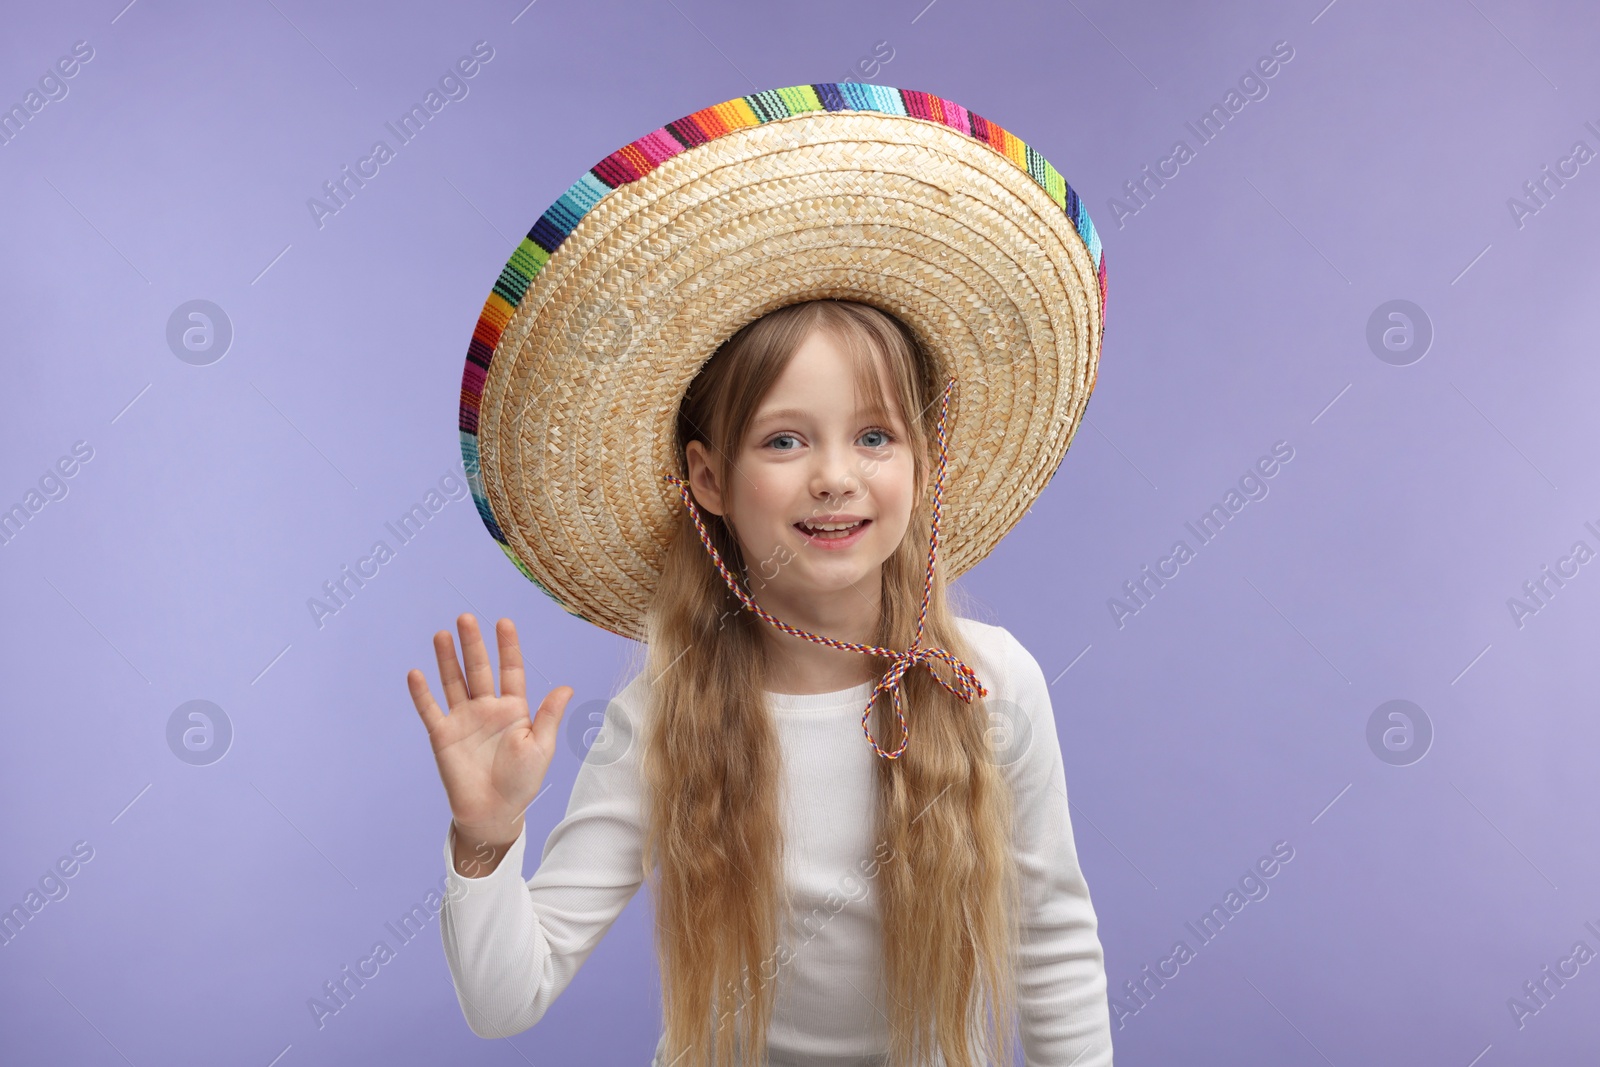 Photo of Cute girl in Mexican sombrero hat waving hello on purple background